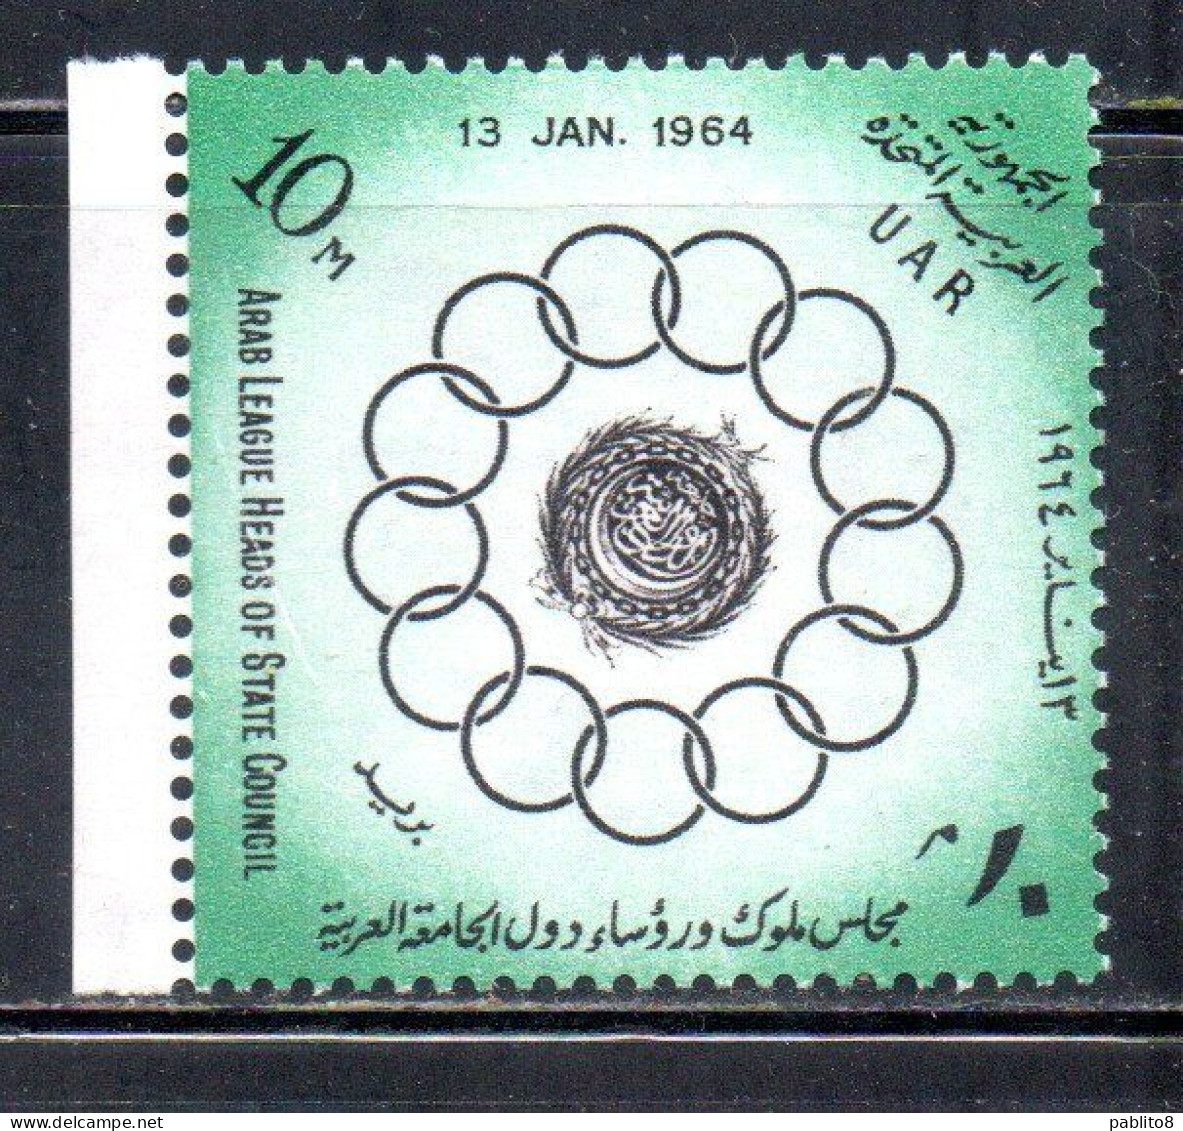 UAR EGYPT EGITTO 1964 FIRST MEETING OF THE HEADS STATE OF THE ARAB LEAGUE CAIRO 10m MNH - Nuovi